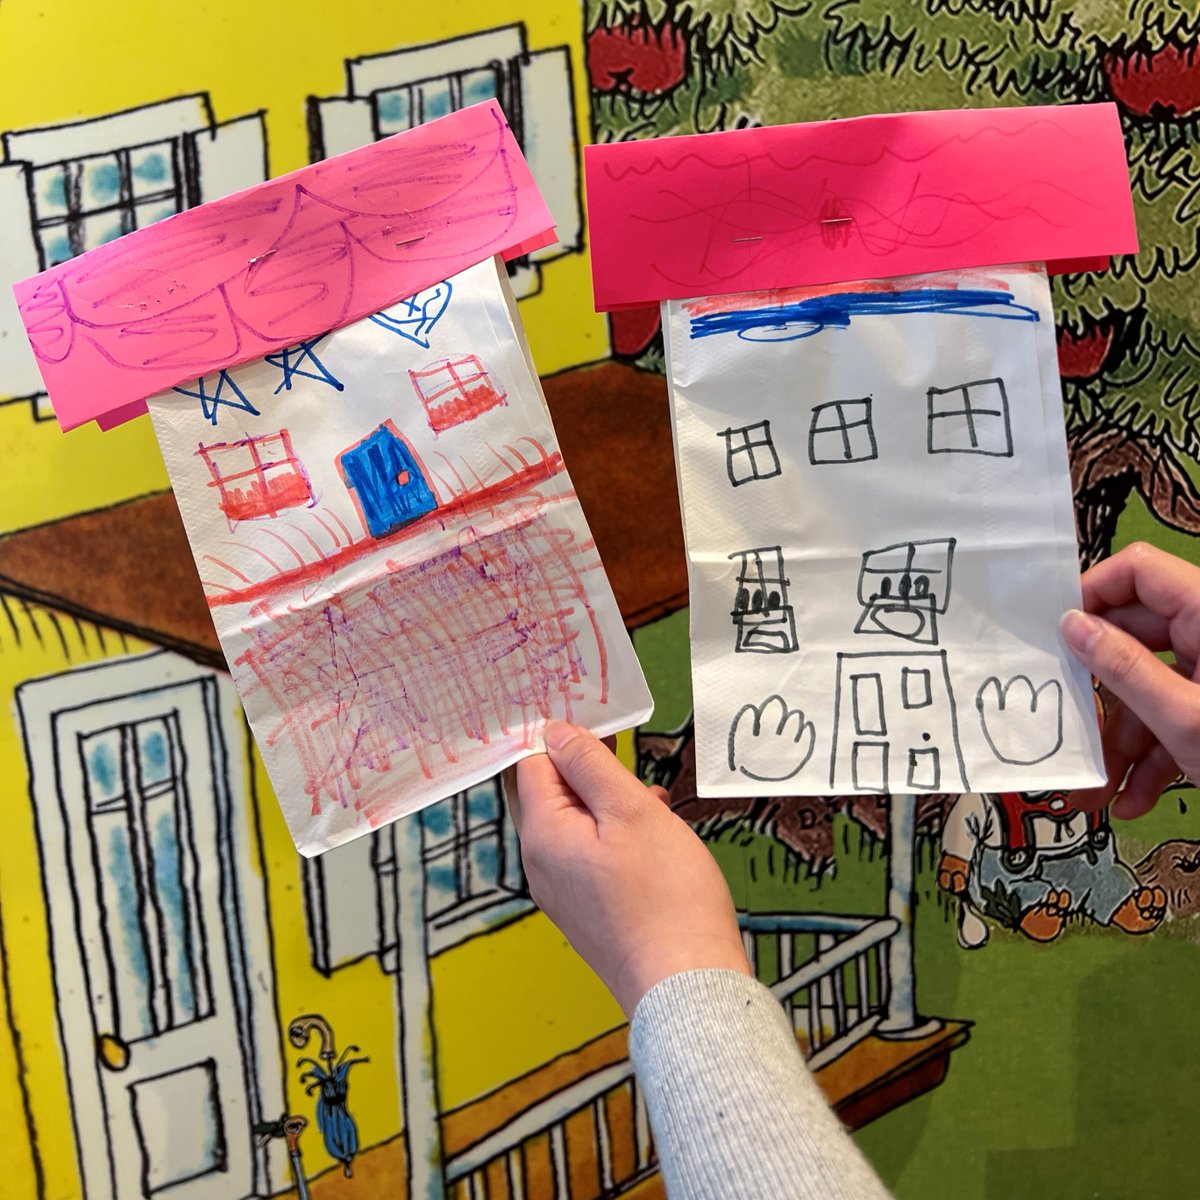 Stop by the Fairfield YMCA between 10am & 1pm on April 29 for Fairfield’s Earth Day celebration. We will be upcycling paper lunch bags to create our very own “Busytown,” taking inspiration from our exhibit, “The Road to Busytown: Richard Scarry’s Life in Fairfield County.”